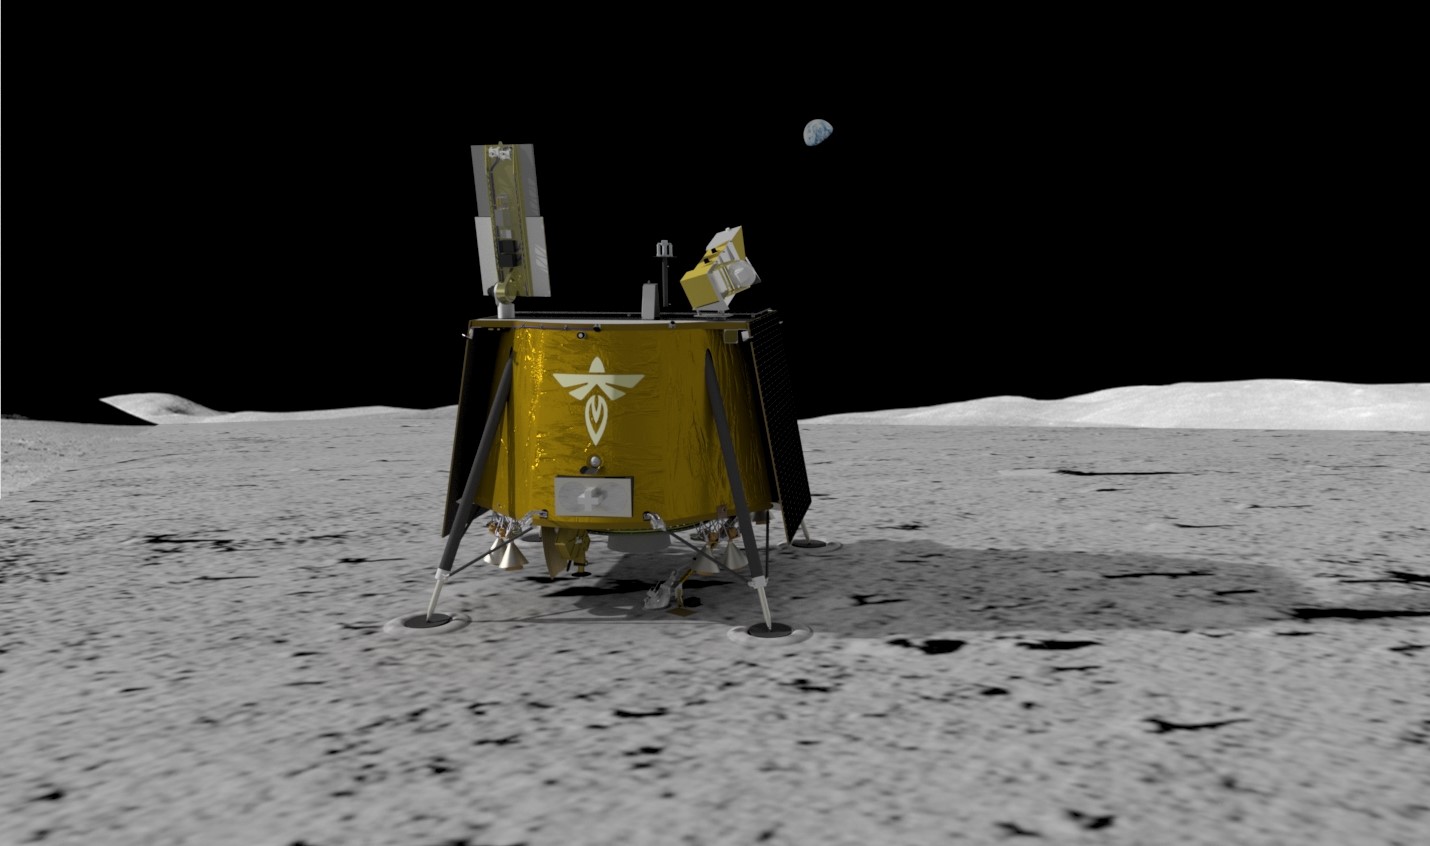 Illustration of of Firefly Aerospace’s Blue Ghost lander on the lunar surface